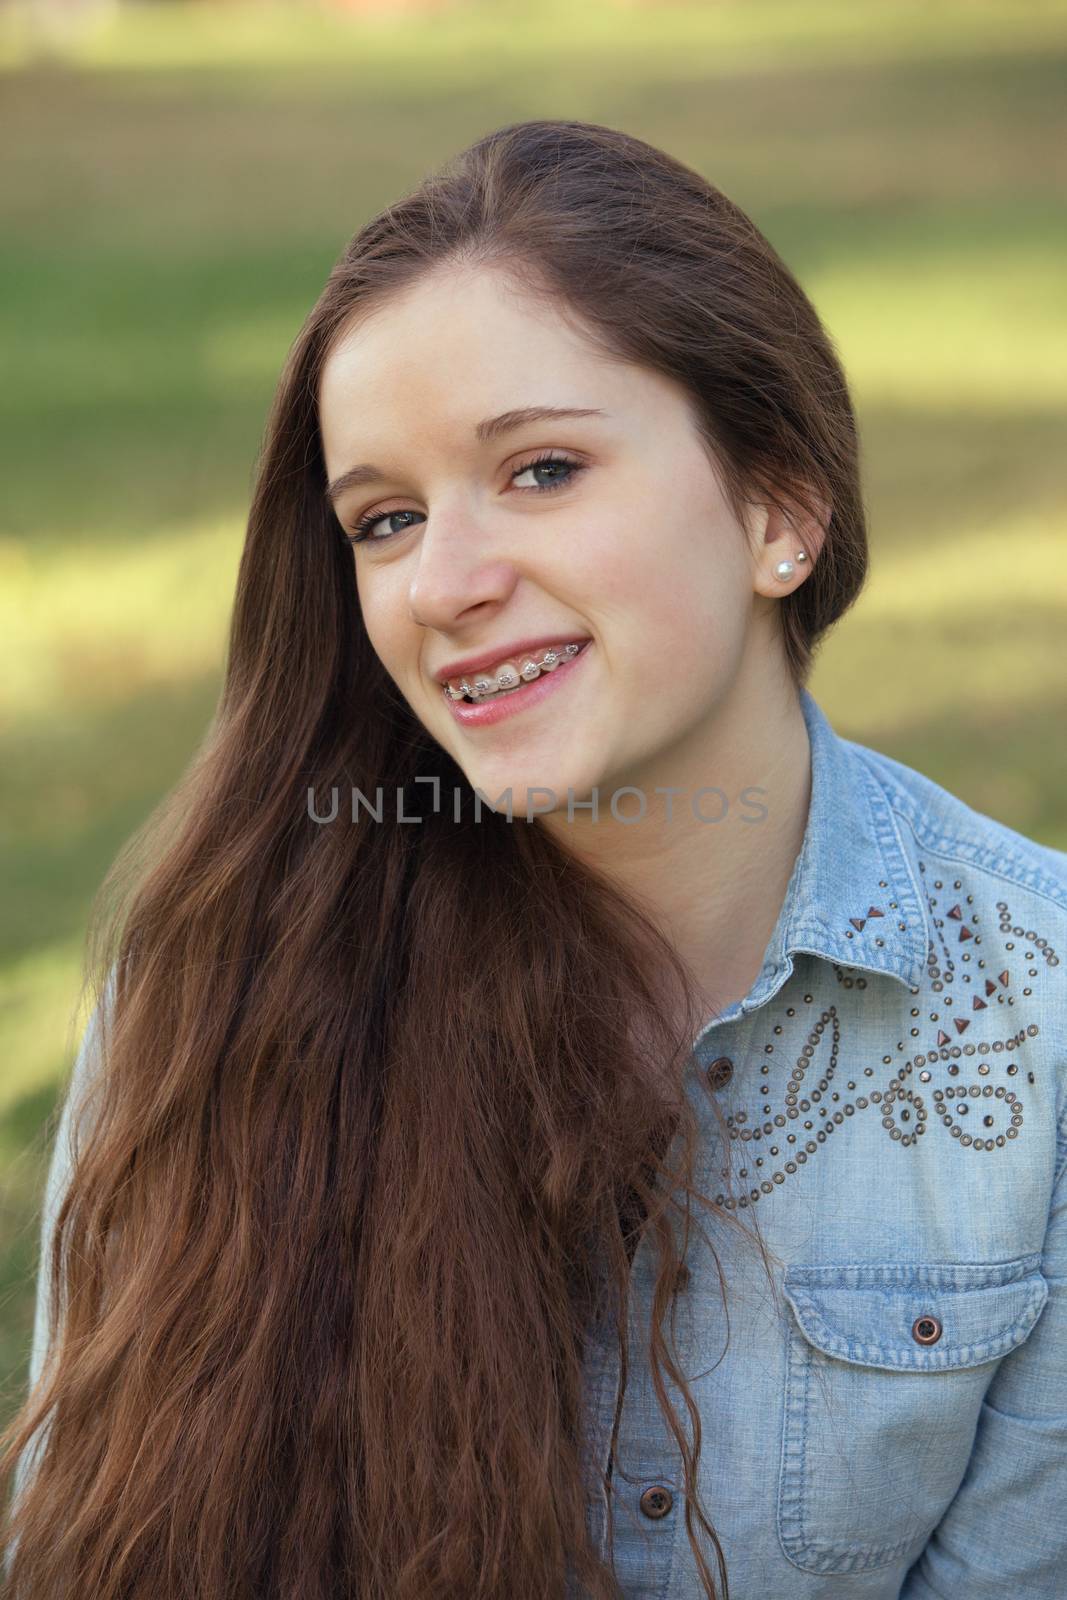 Smiling Teen with Long Hair by Creatista